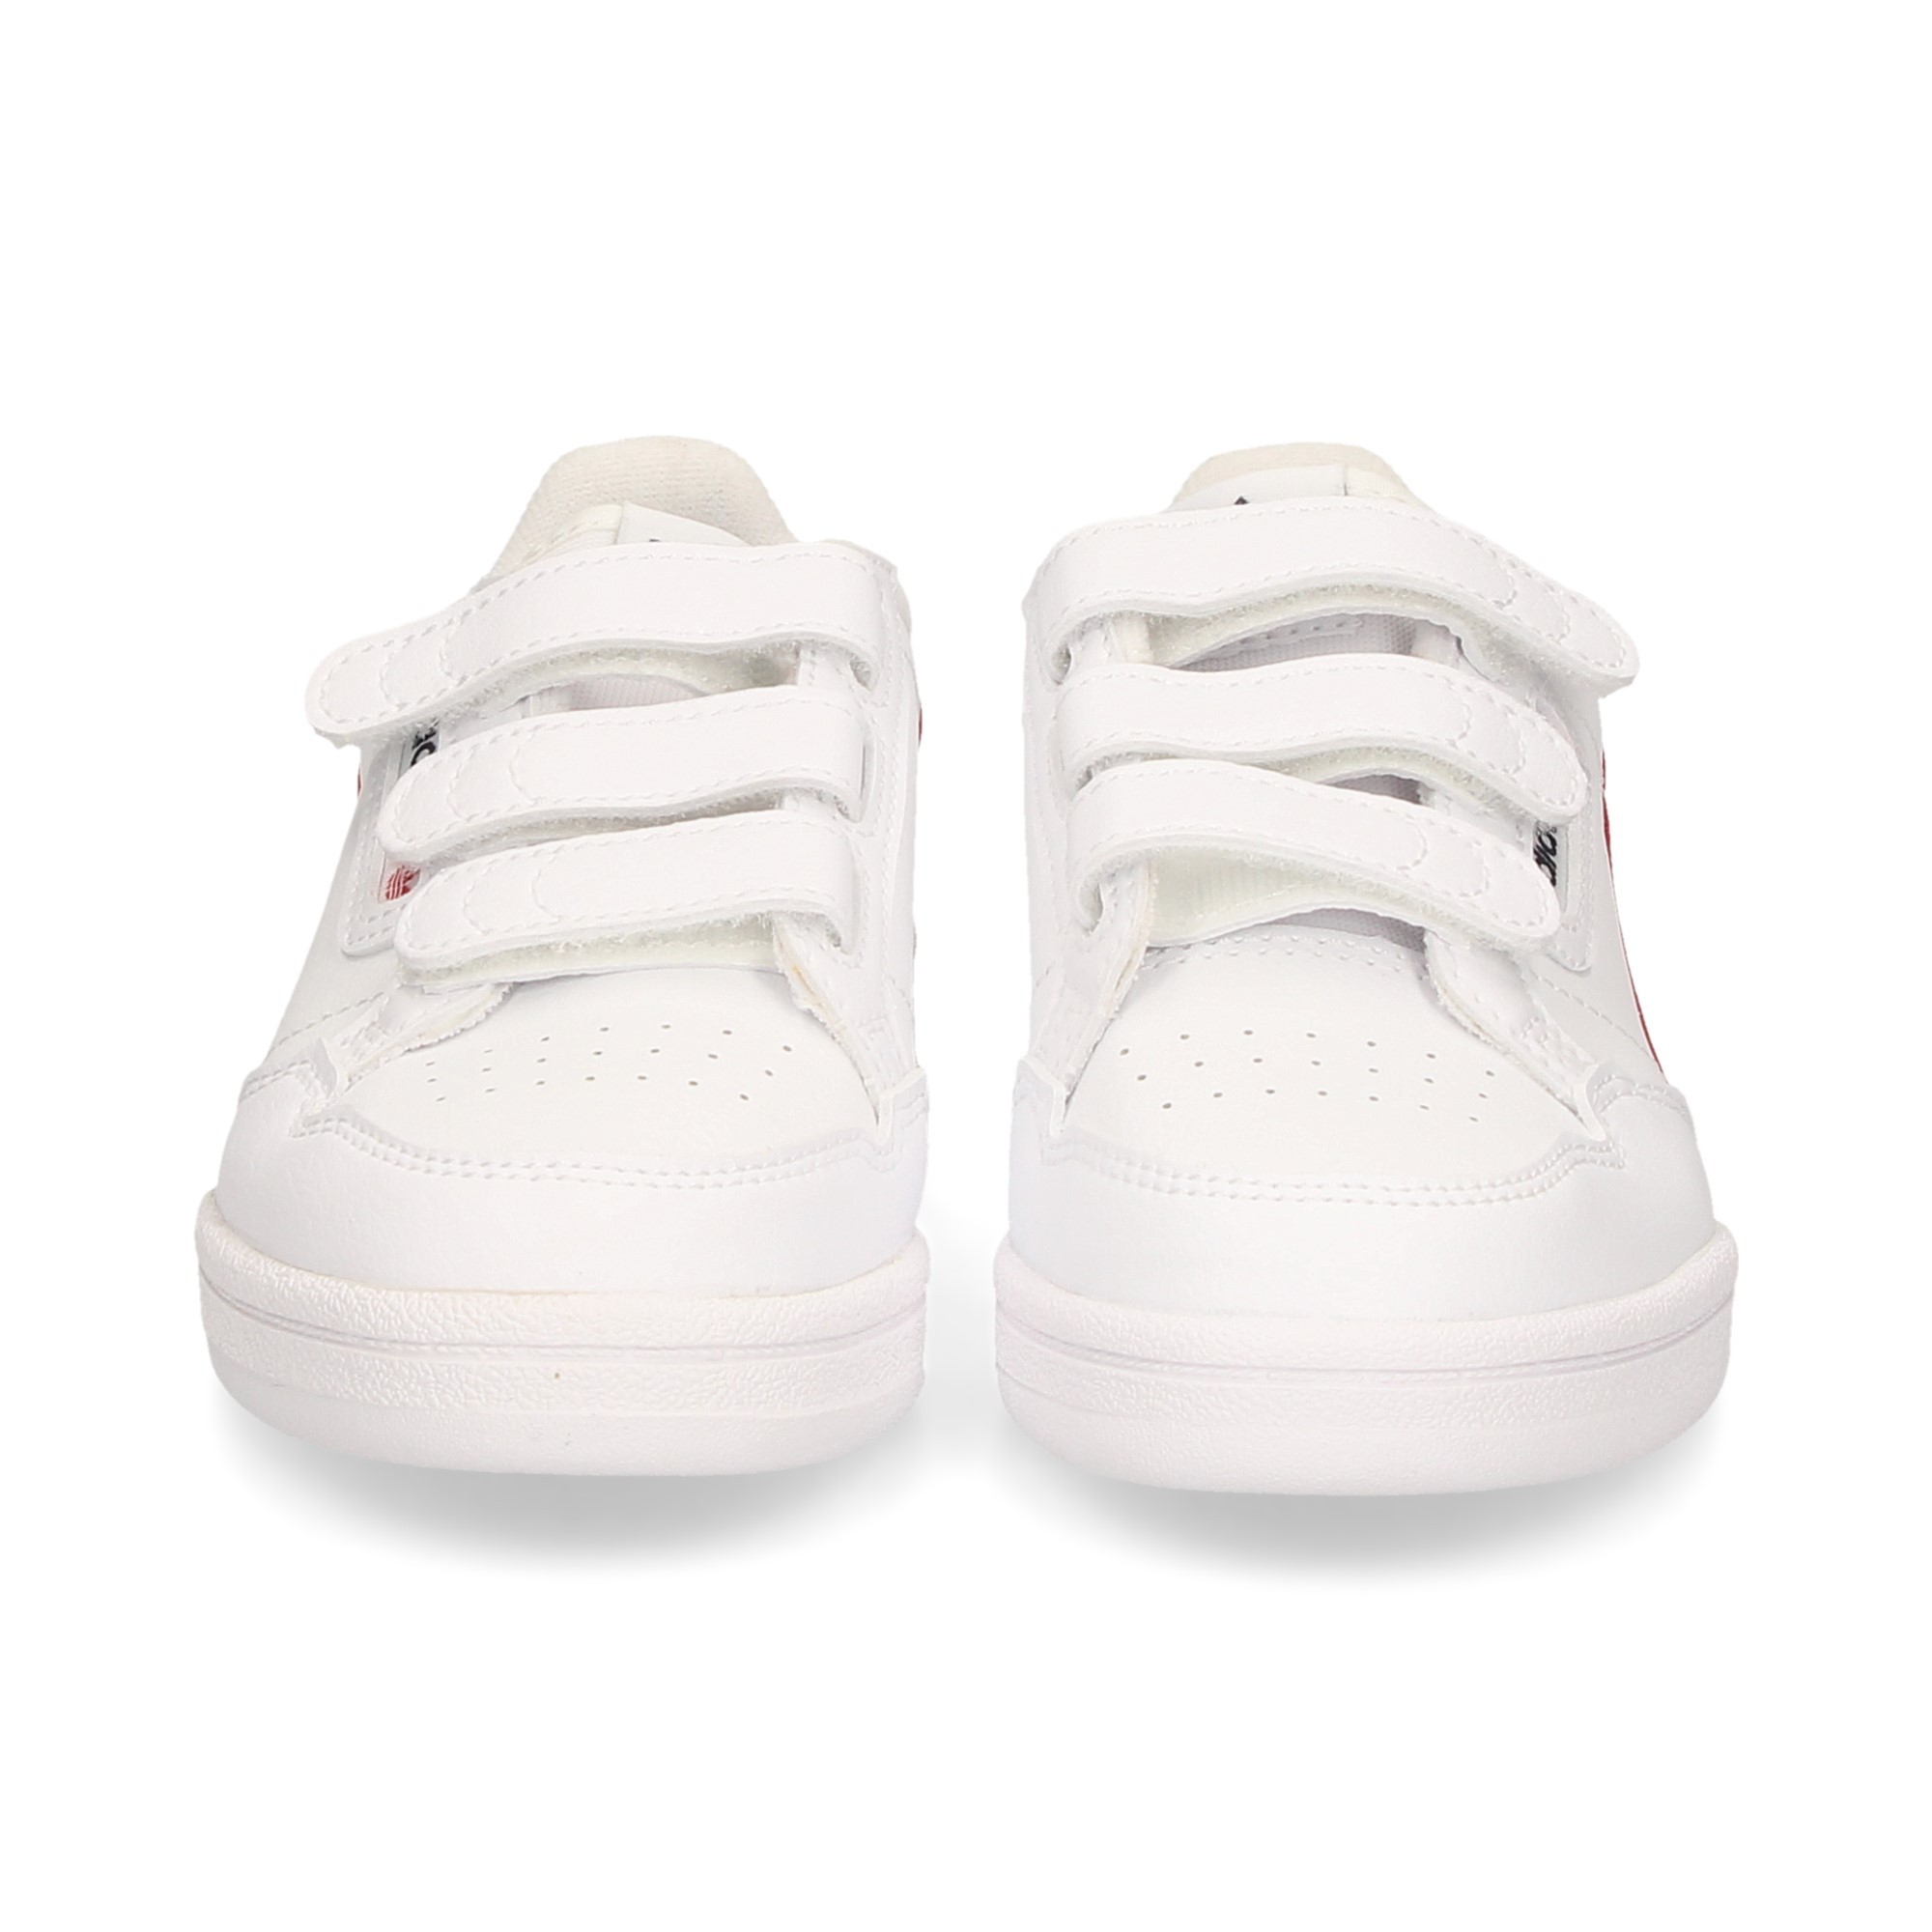 sporty-live-red-velcro-white-leather